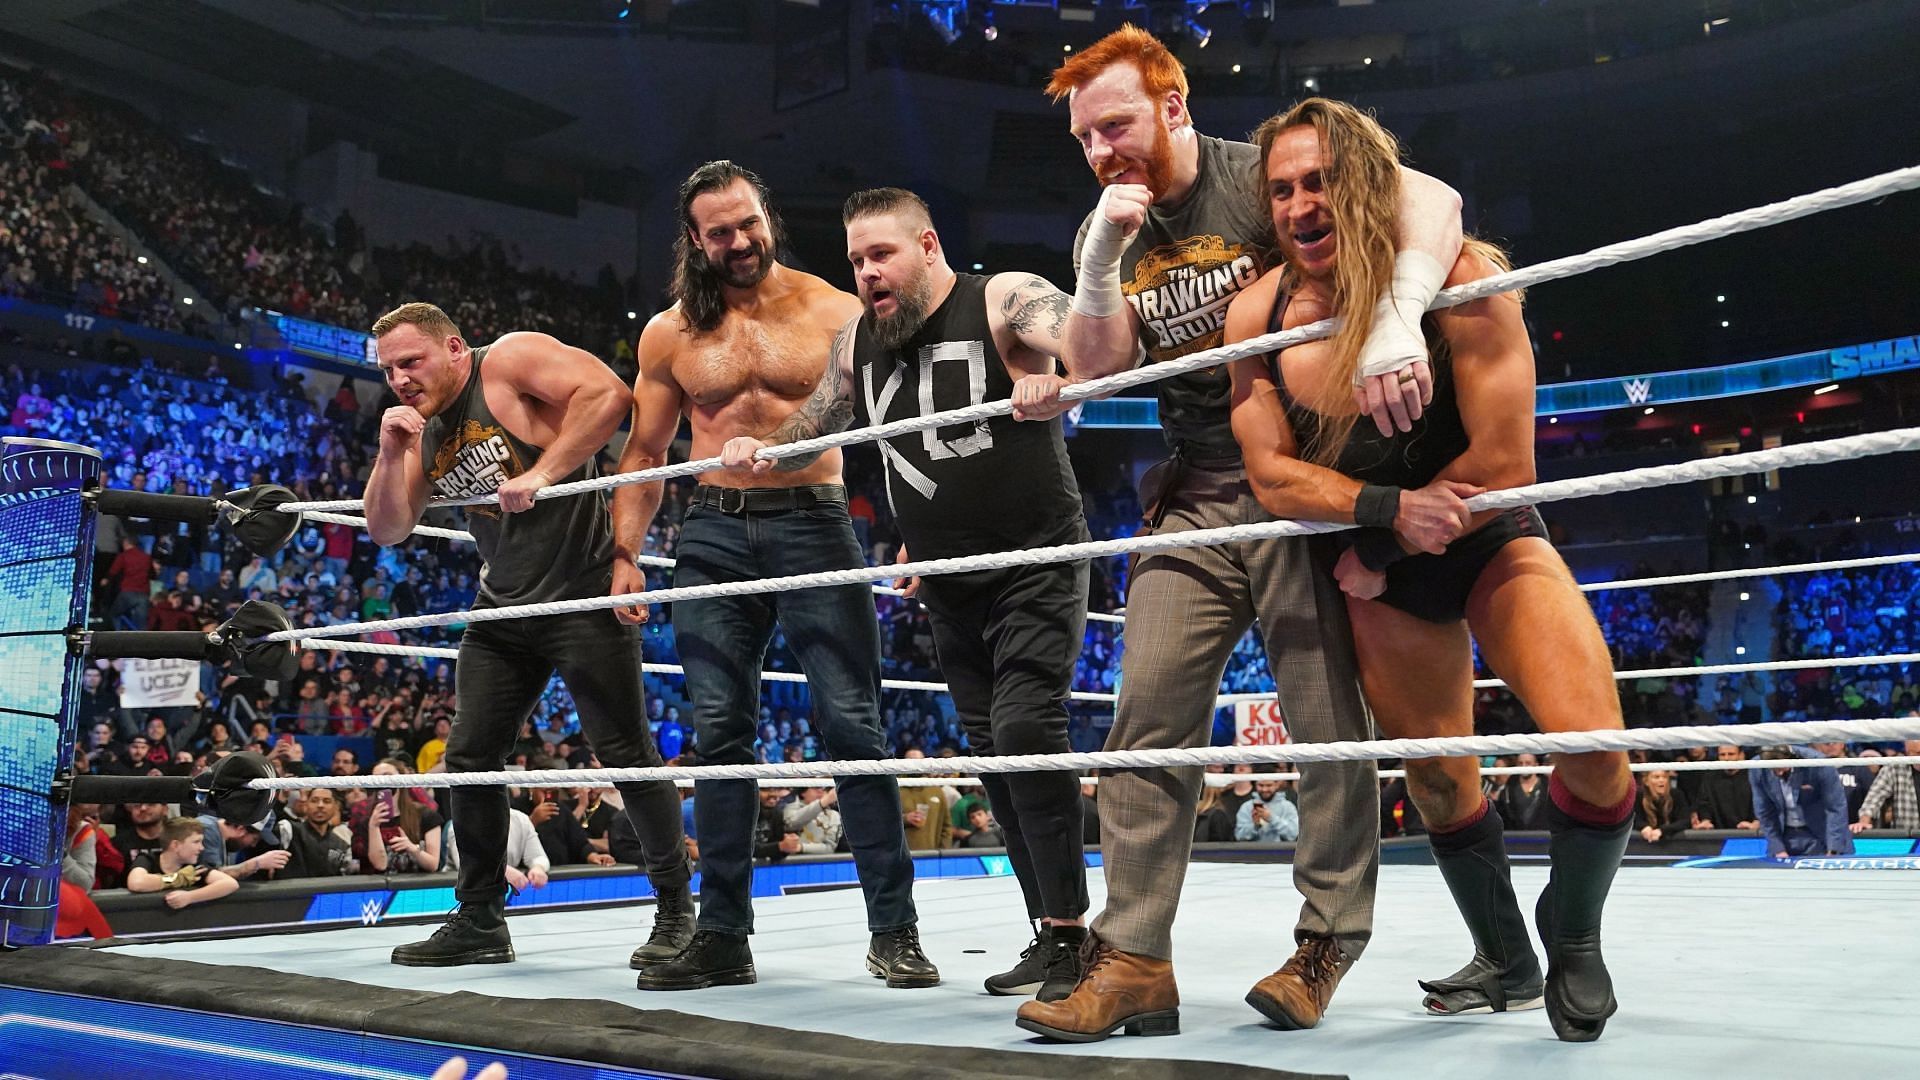 Kevin Owens, Drew McIntyre, and The Brawling Brutes